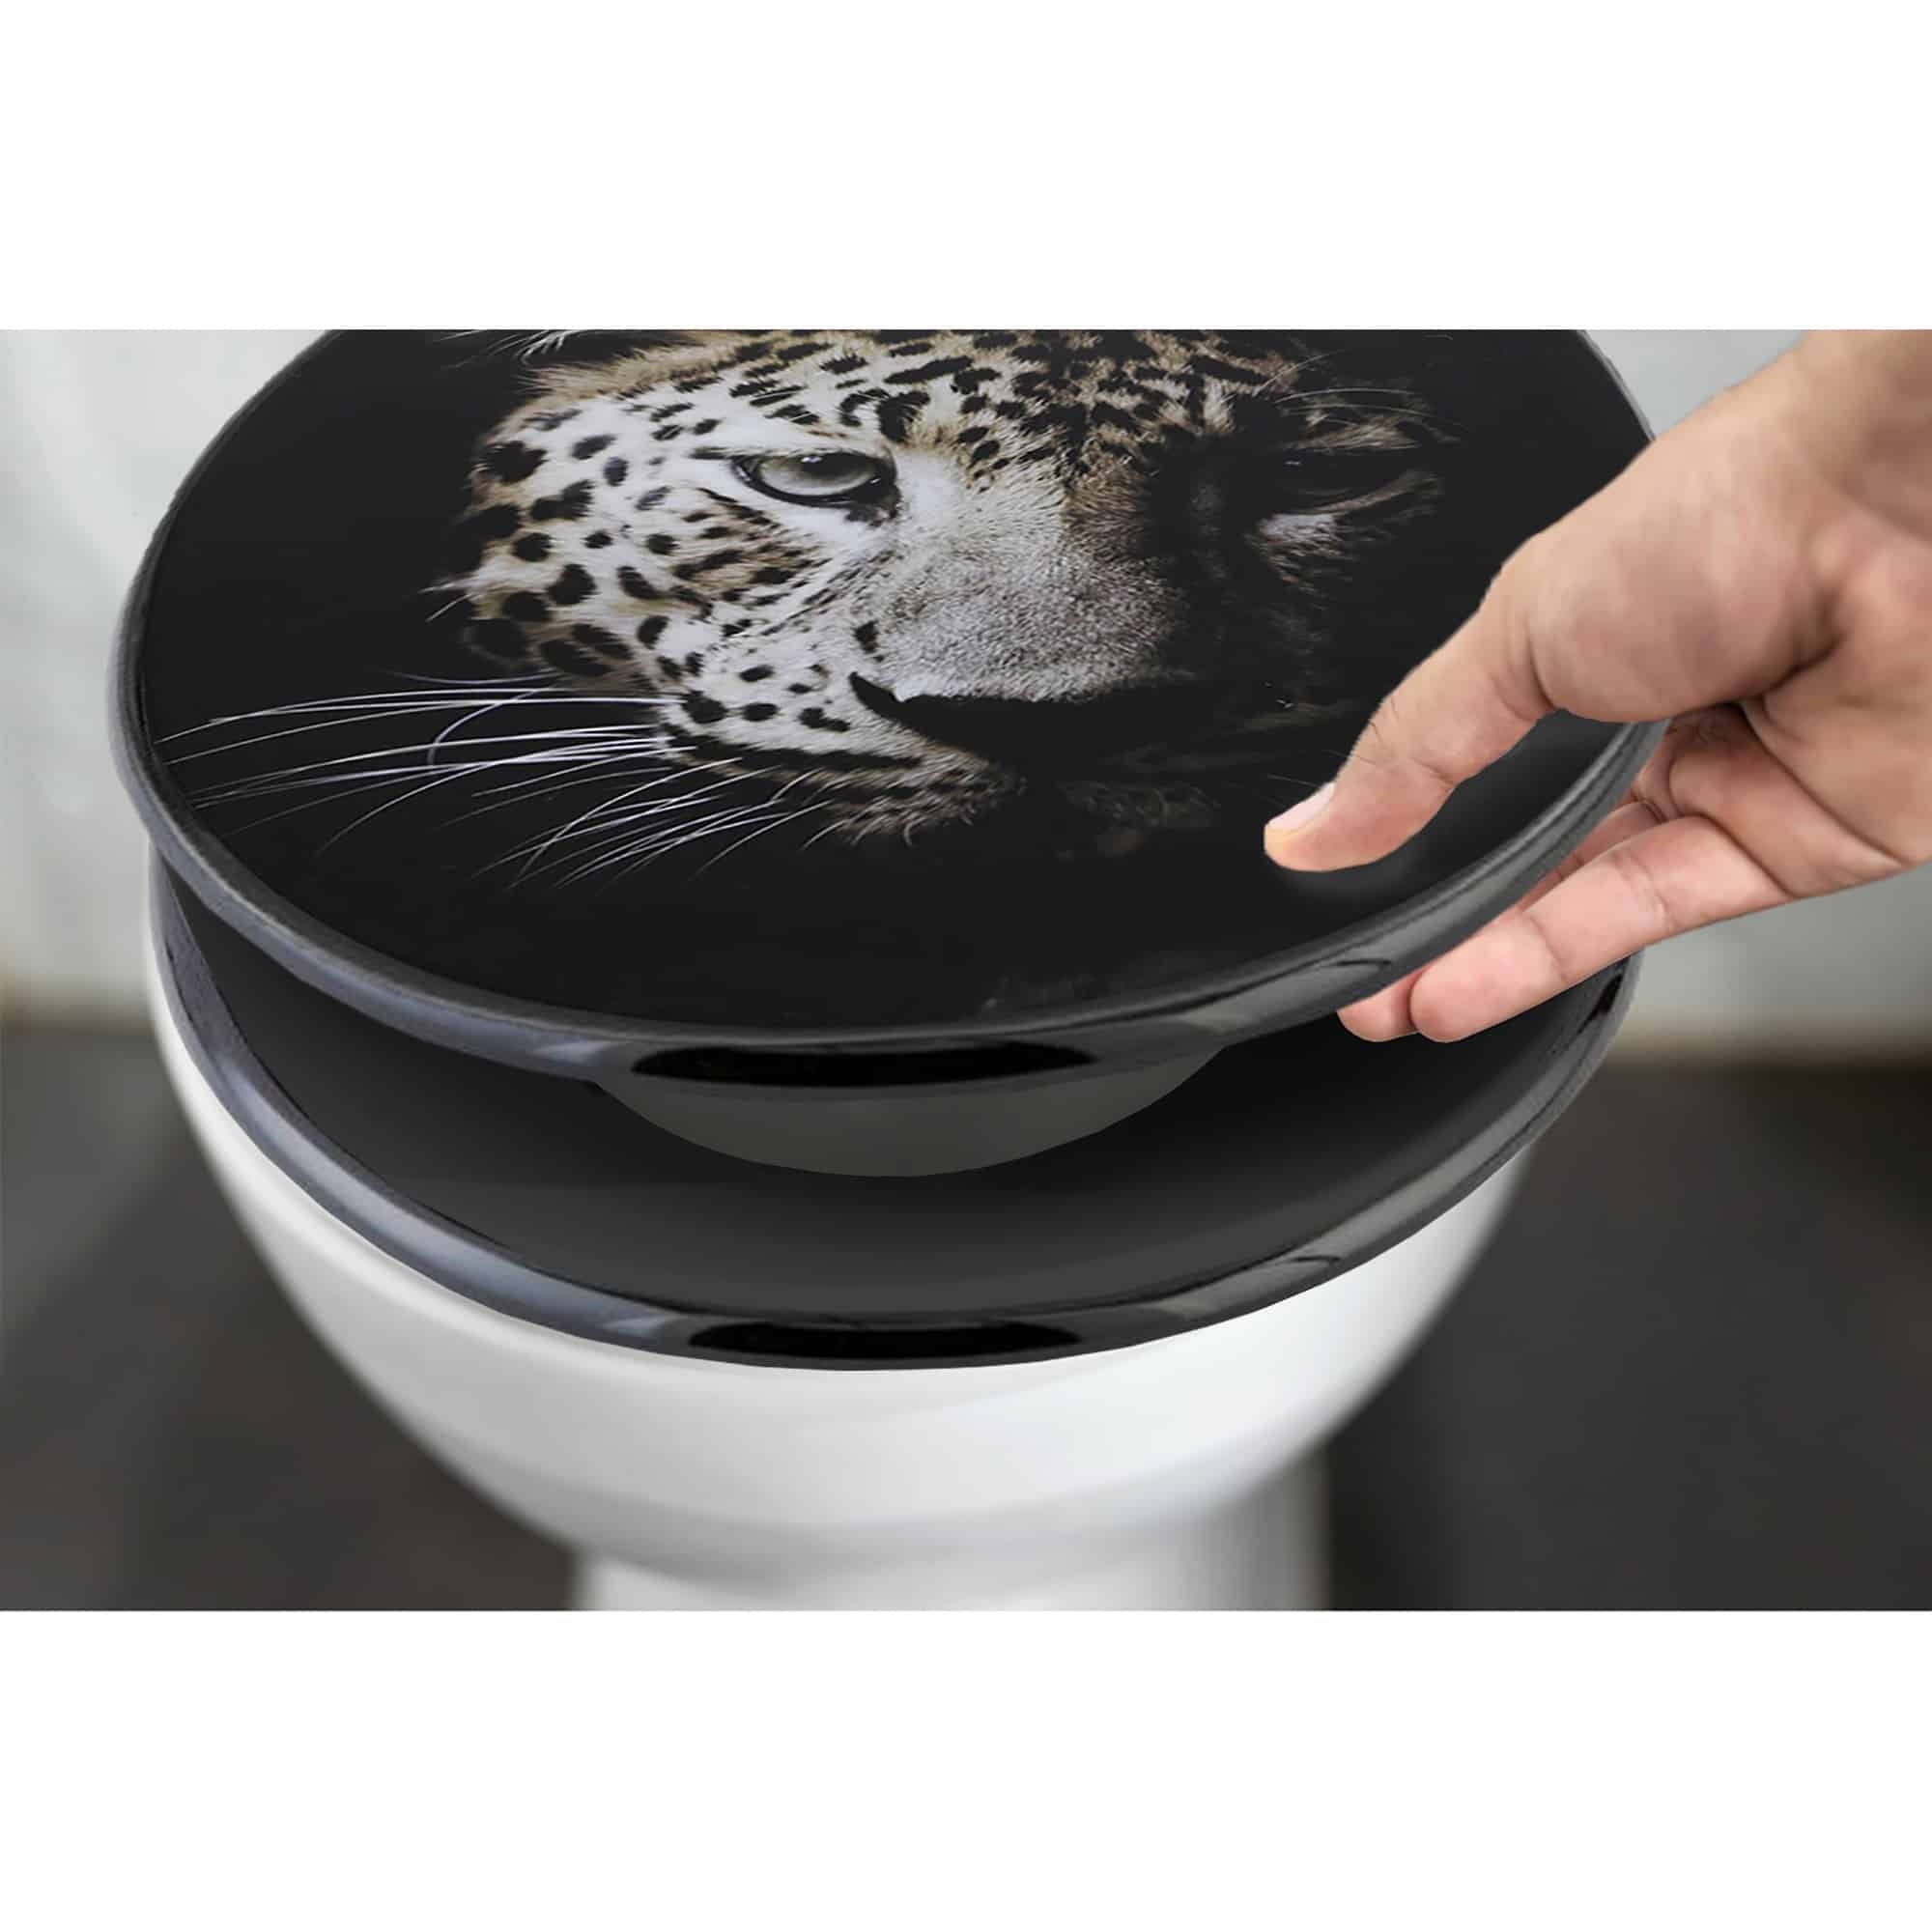 black and brown leopard print toilet seat